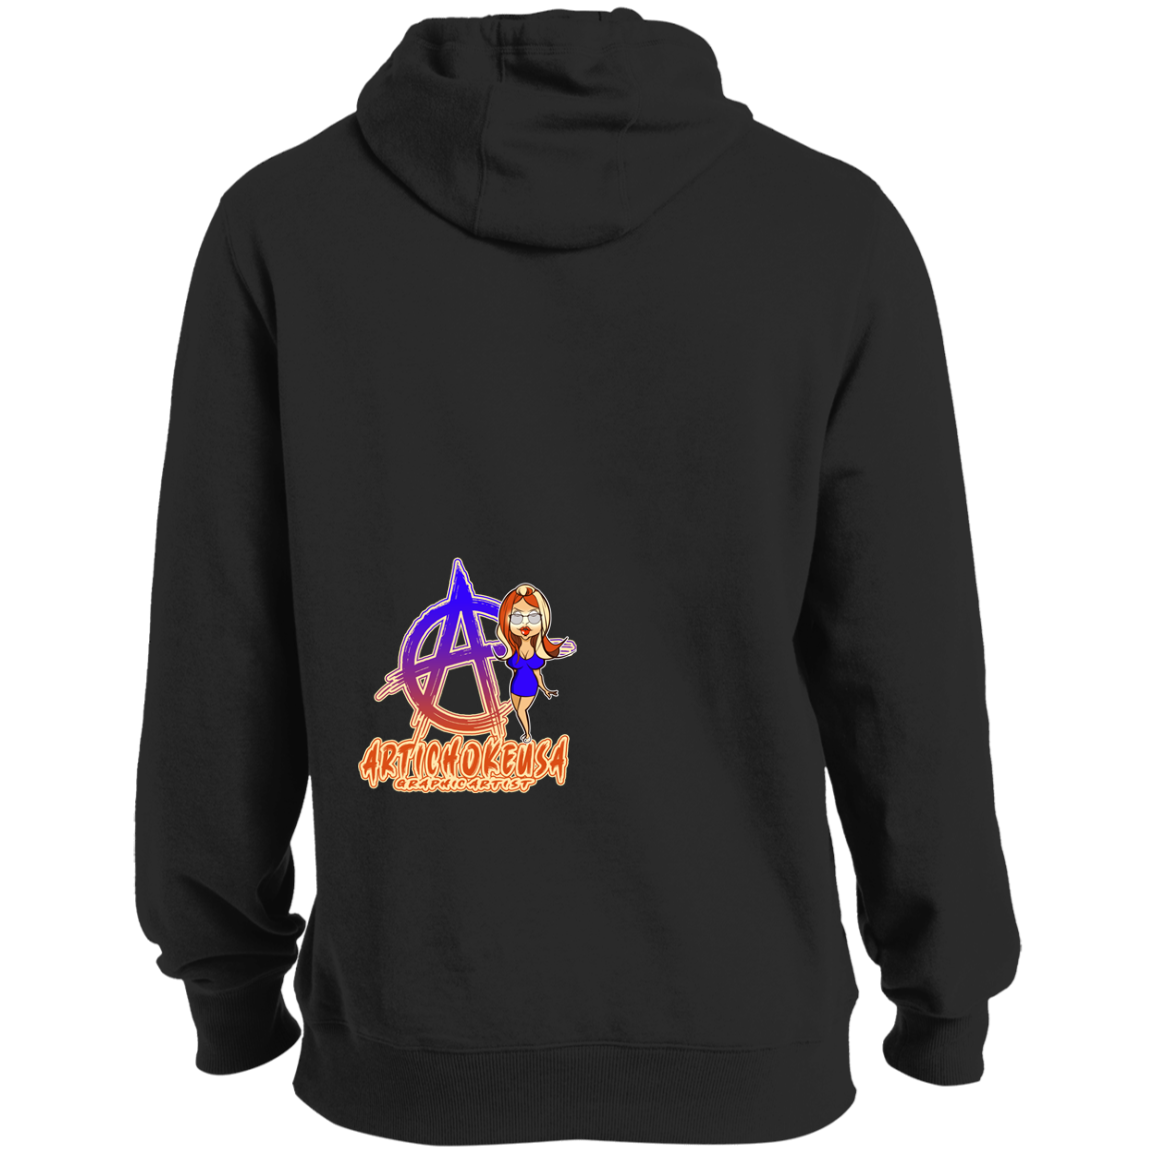 ArtichokeUSA Character and Font Design. Let’s Create Your Own Design Today. Blue Girl. Soft Pullover Hoodie